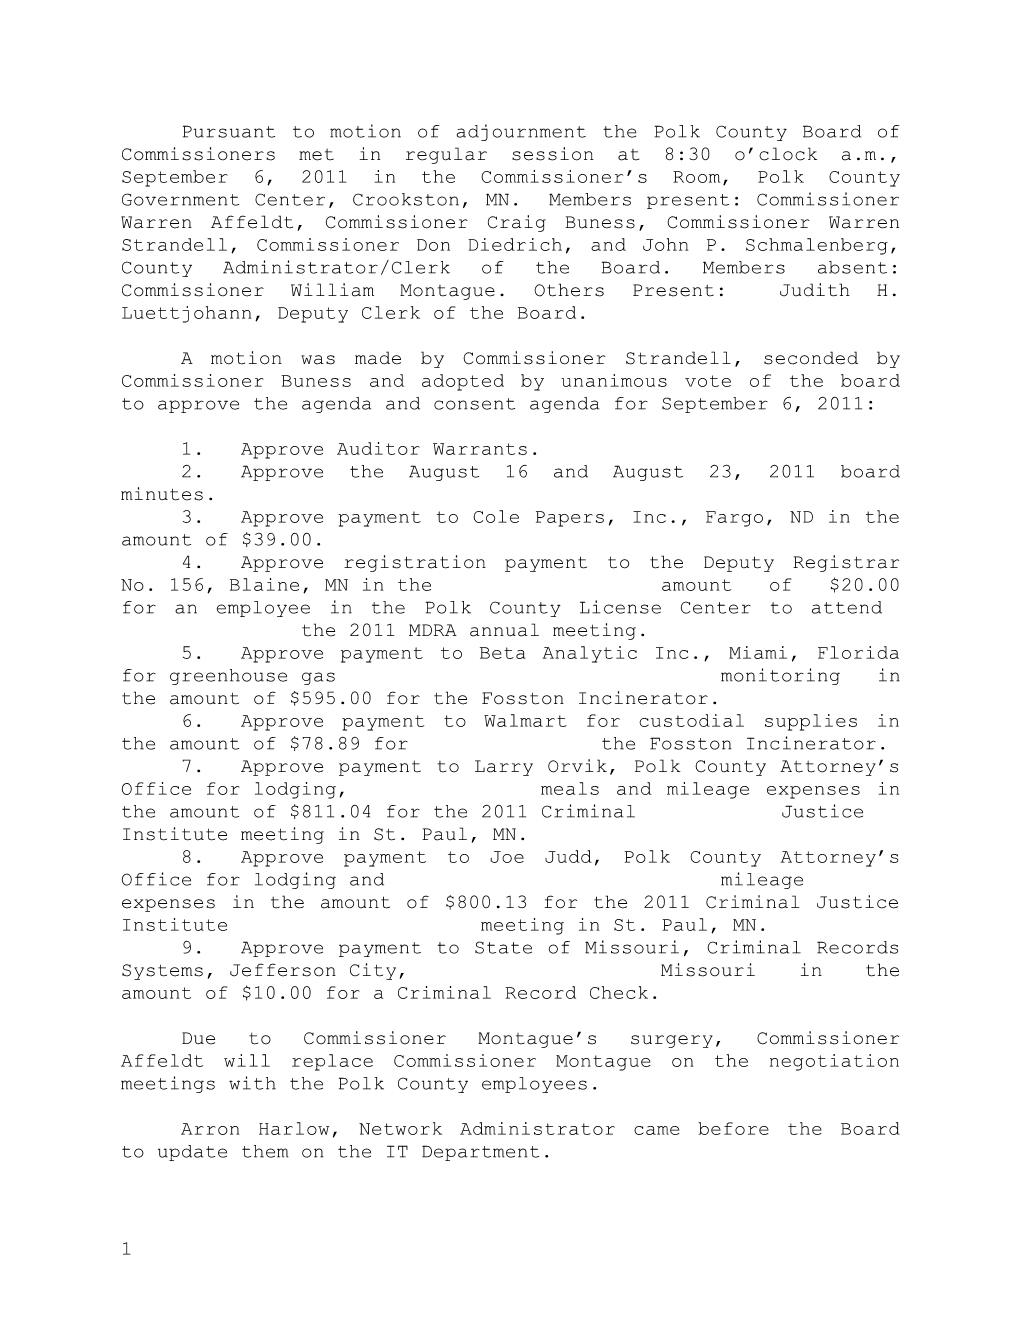 2. Approve the August 16 and August 23, 2011 Board Minutes